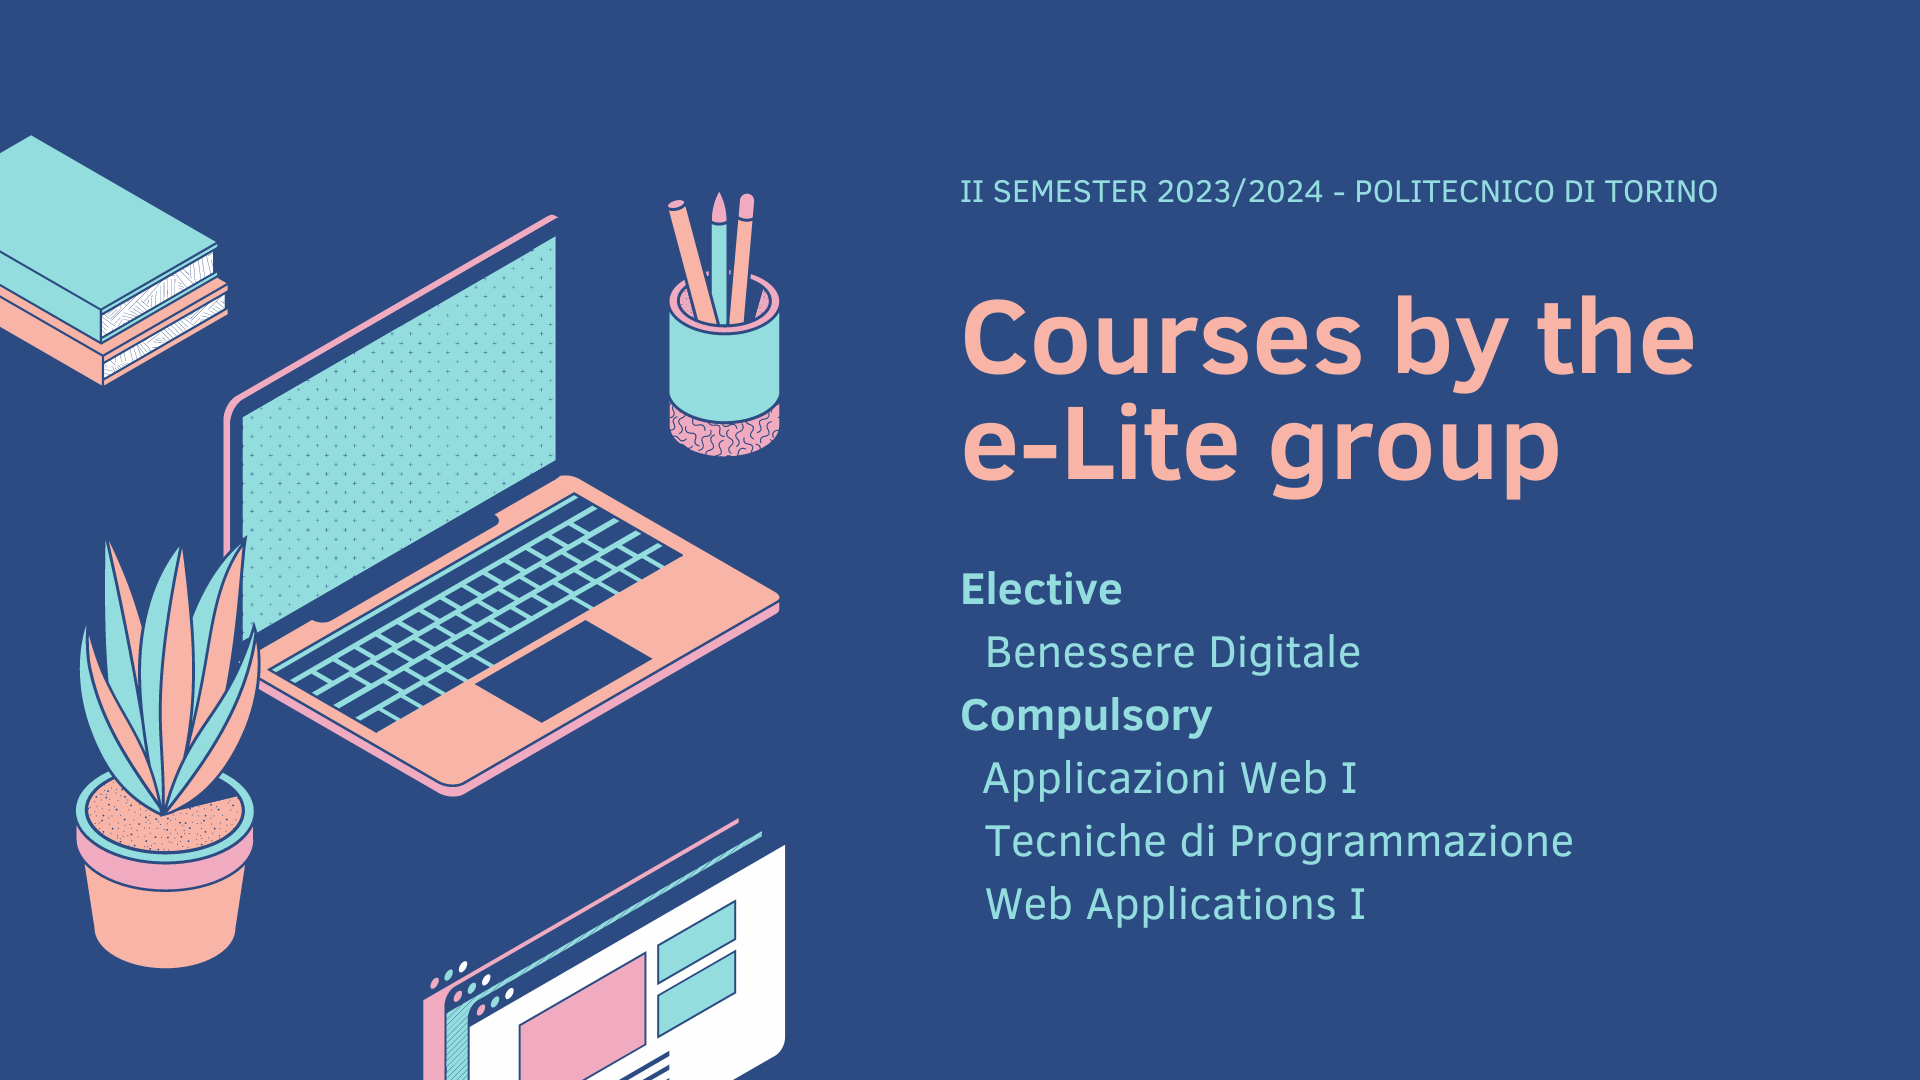 Overview of the upcoming courses by the e-Lite group members